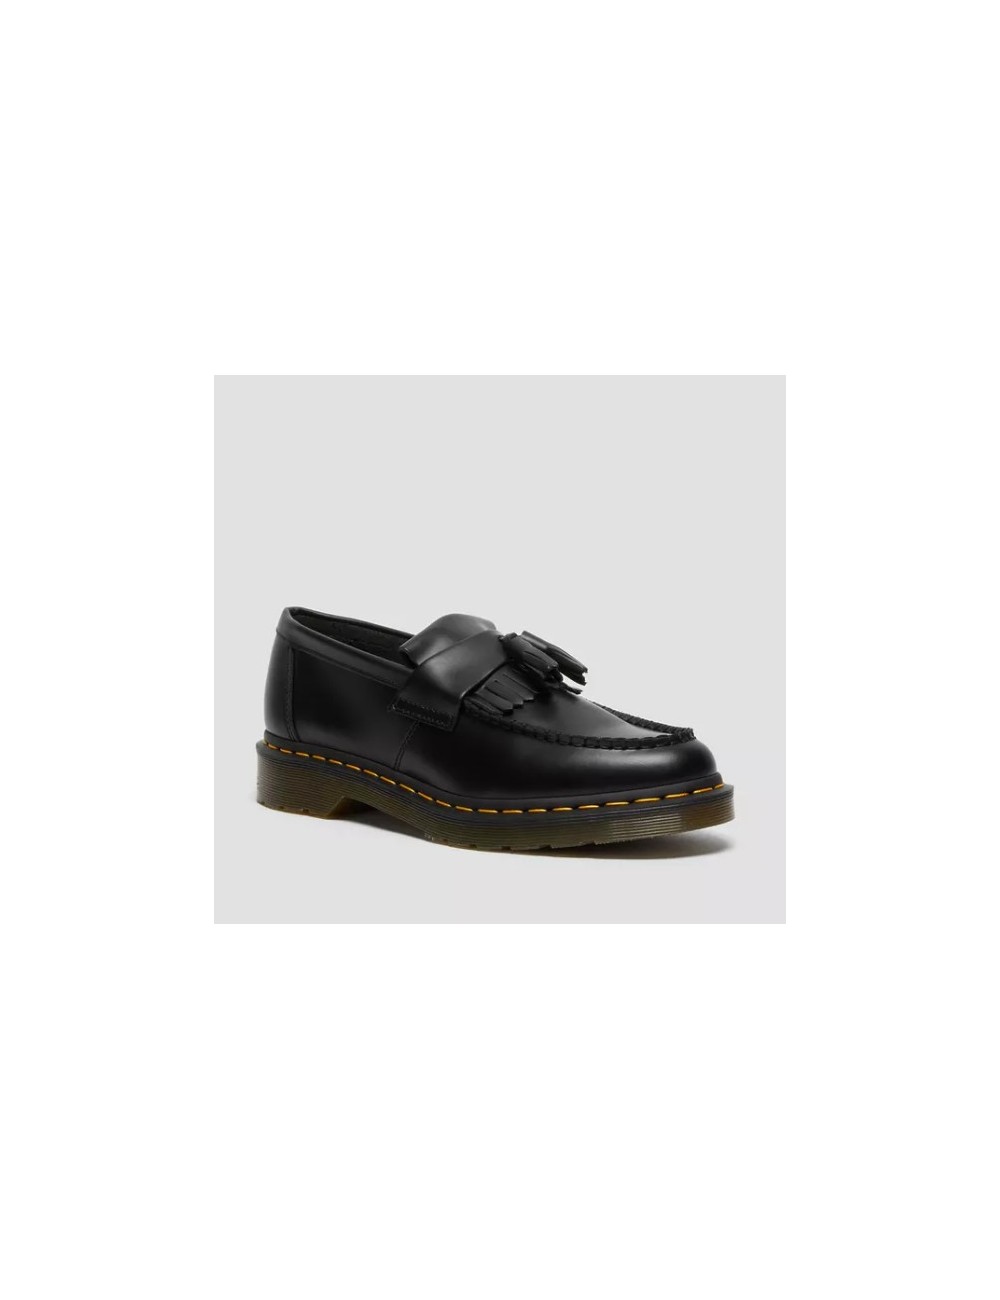 DR MARTENS ADRIAN YELLOW STITCH SMOOTH LEATHER TASSEL LOAFERS